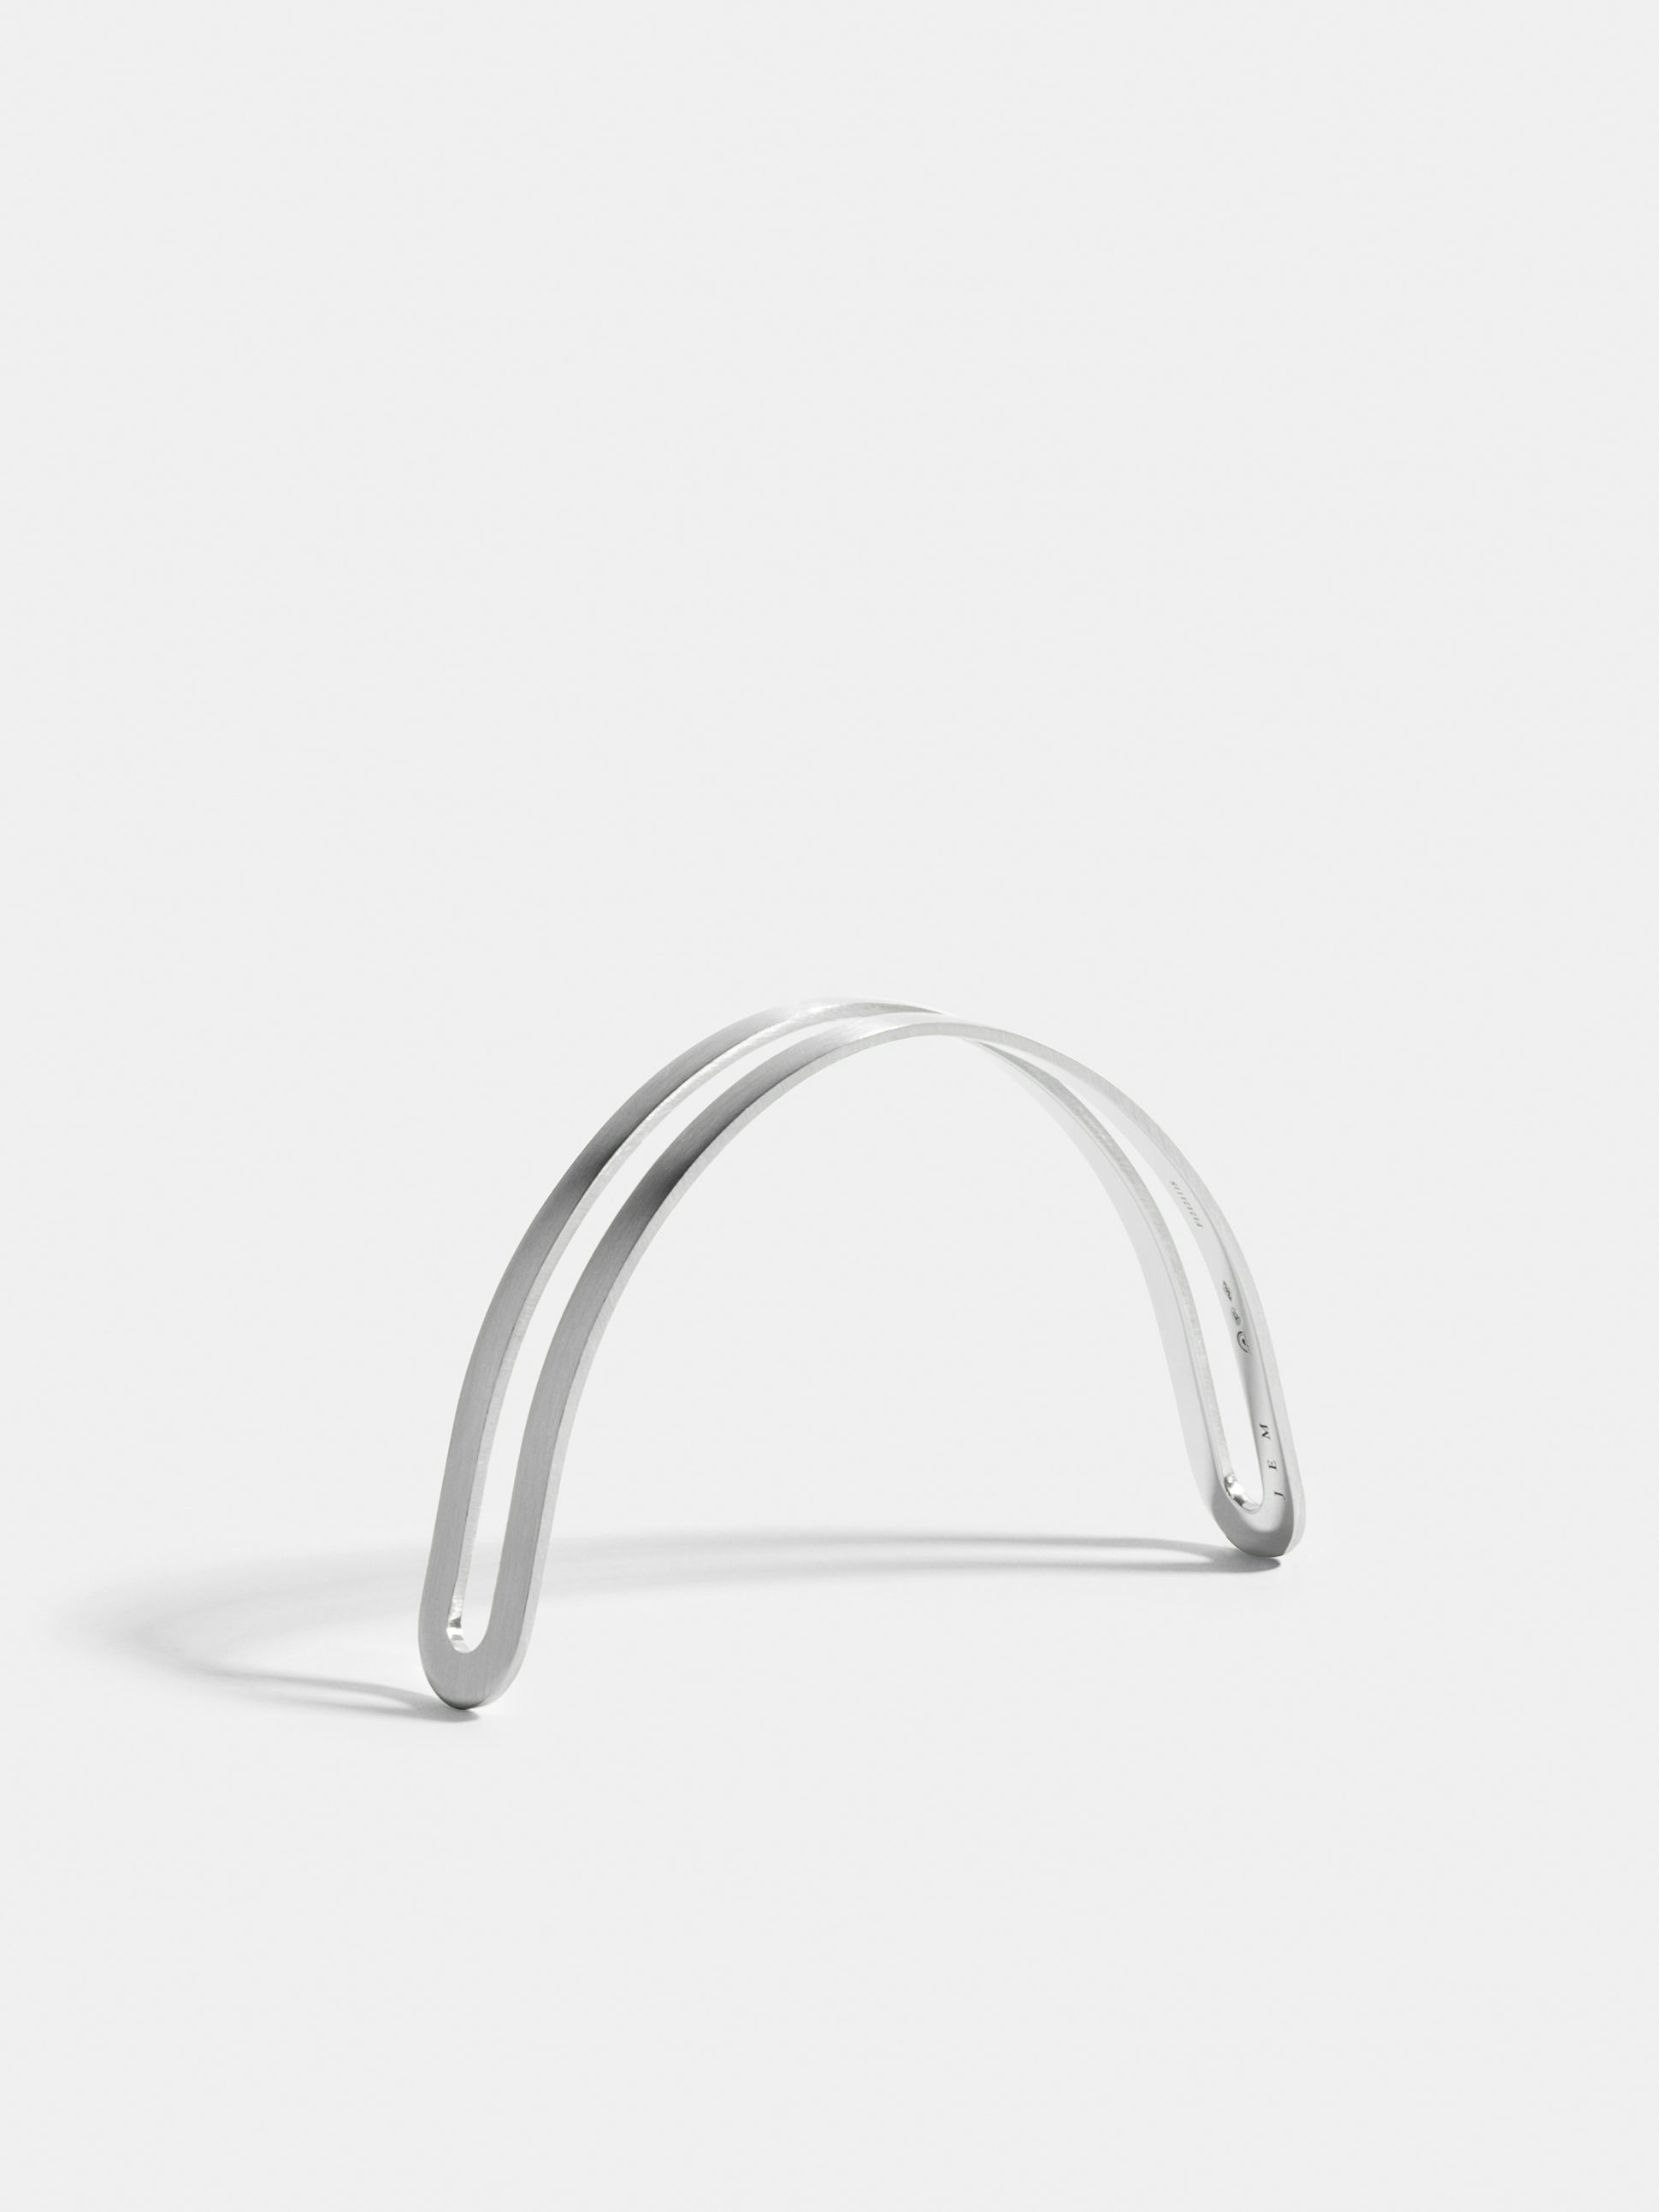 Étreintes simple half-bracelet in 18k Fairmined ethical white gold with a brushed finish.